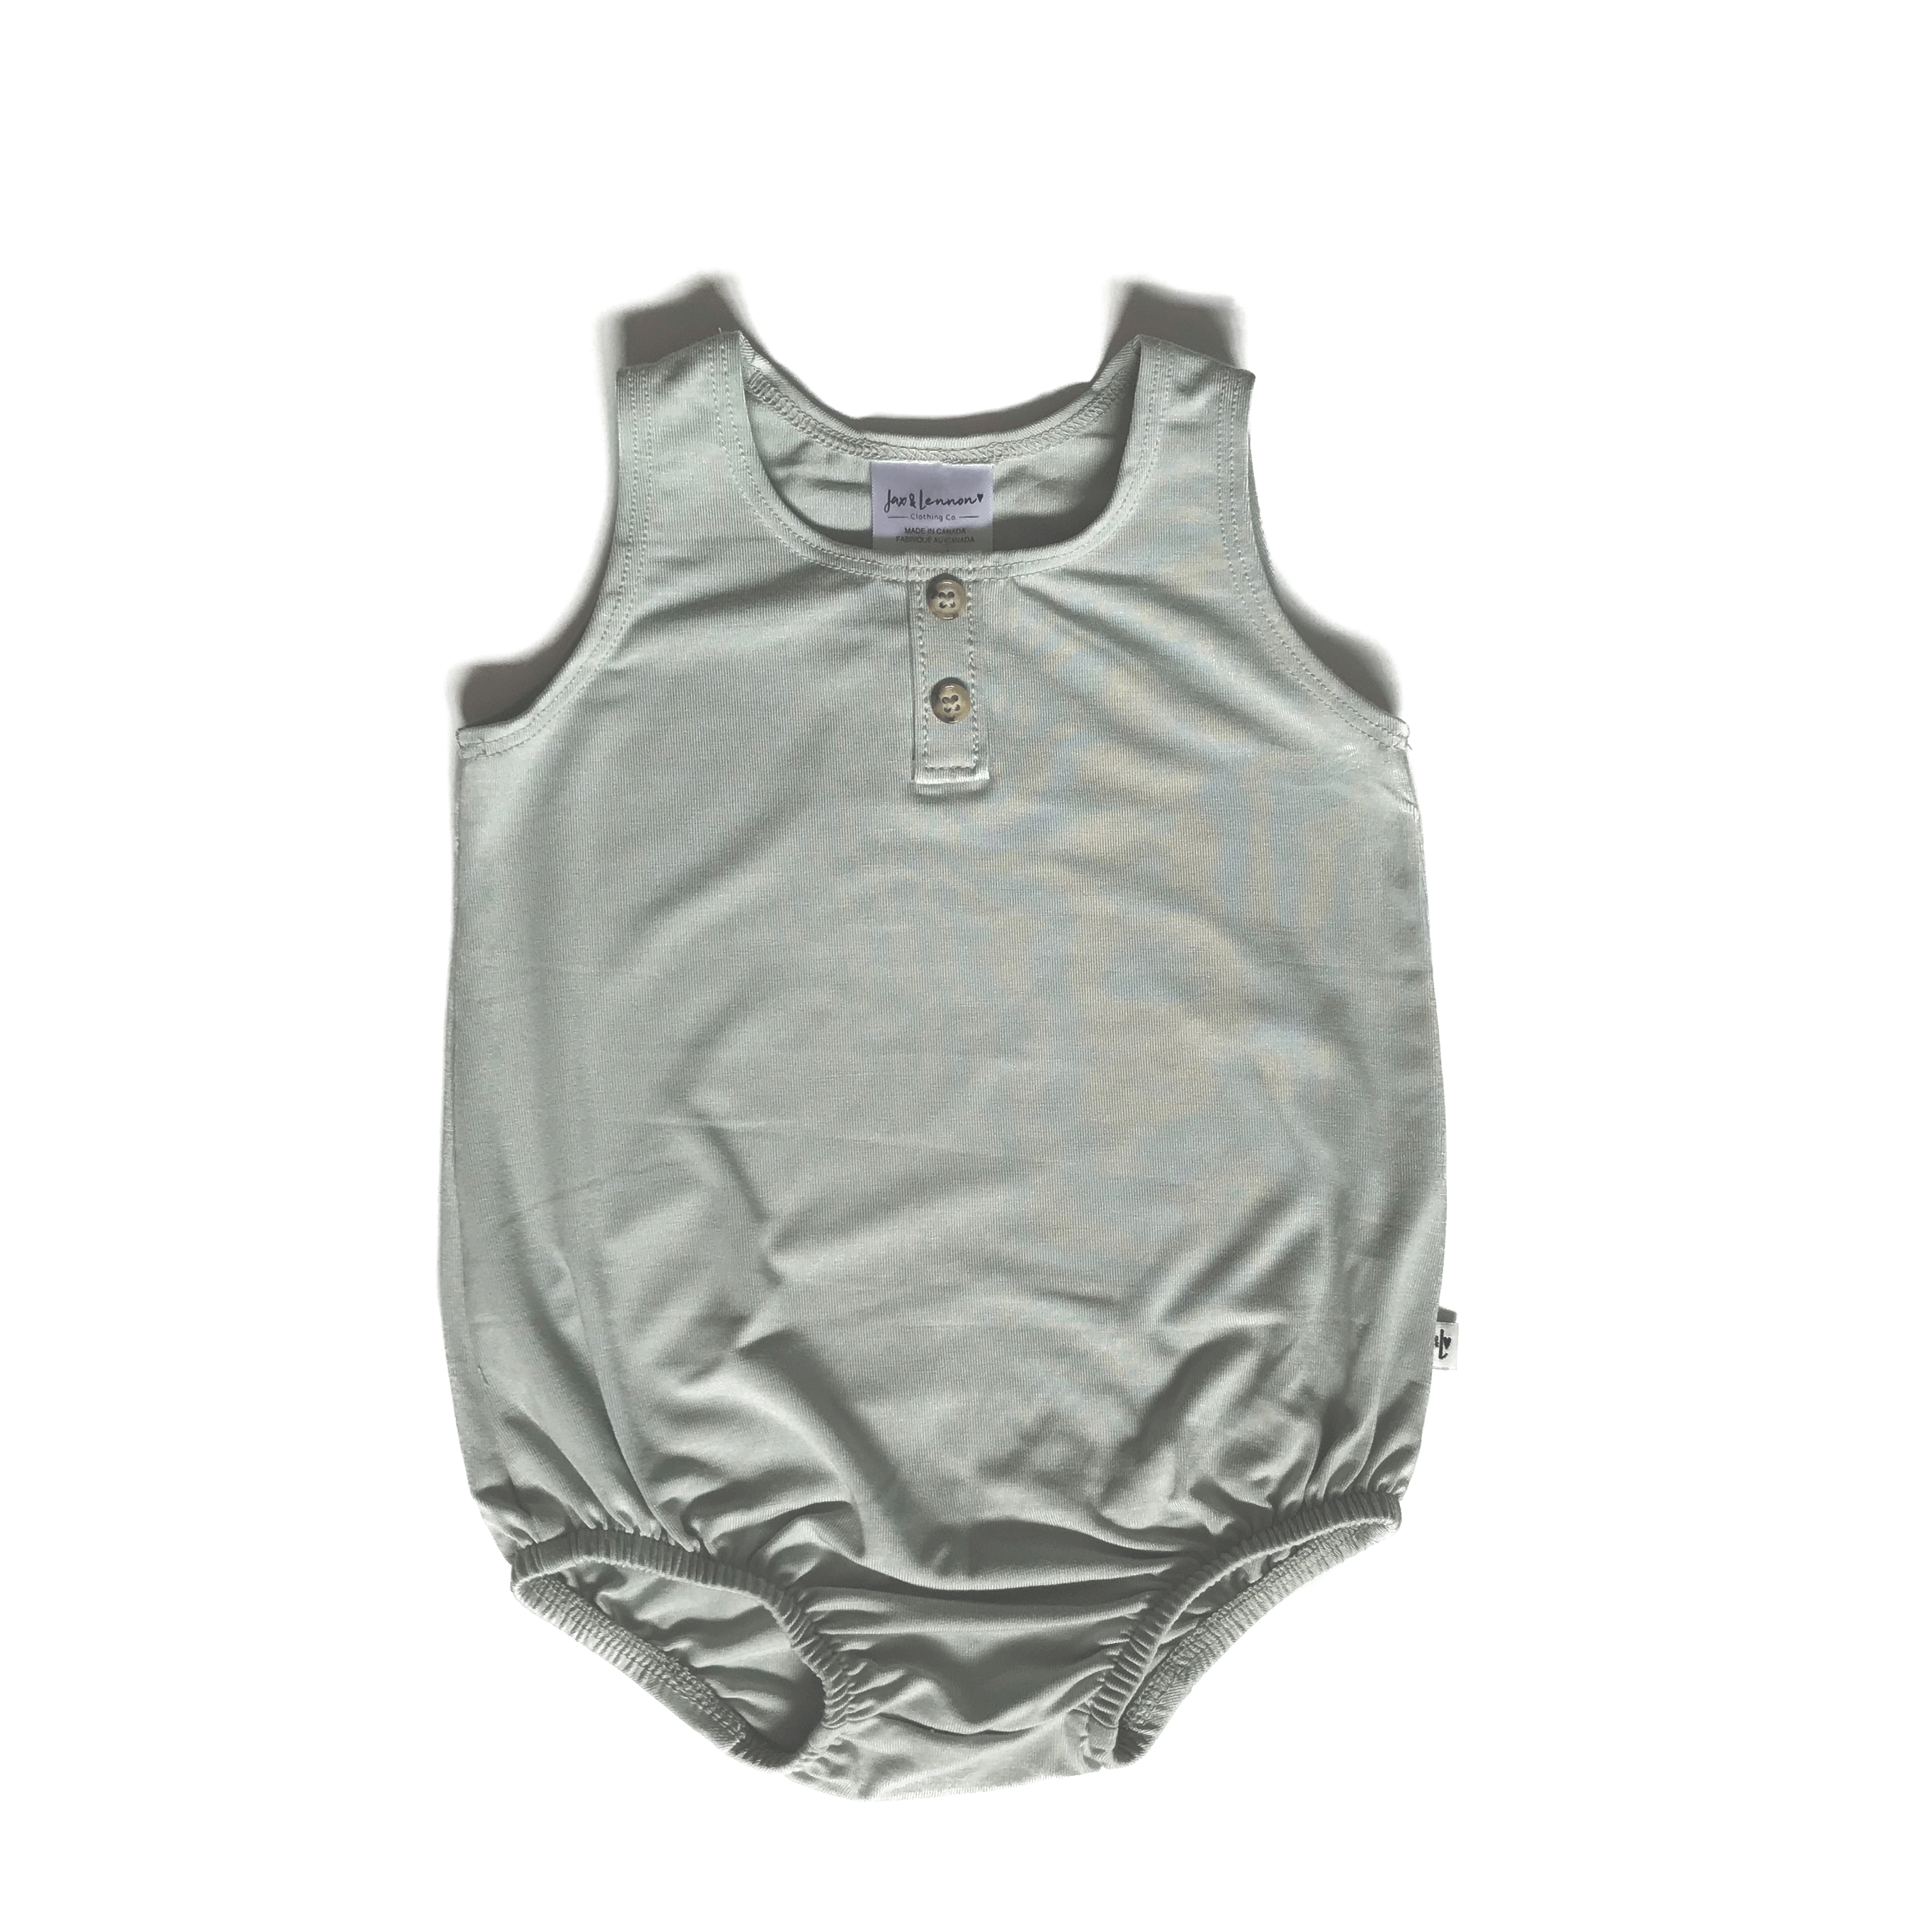 Soft Bamboo baby bubble Romper at Bonjour Baby Baskets, perfect for your BYOB (Build Your Own Basket) 